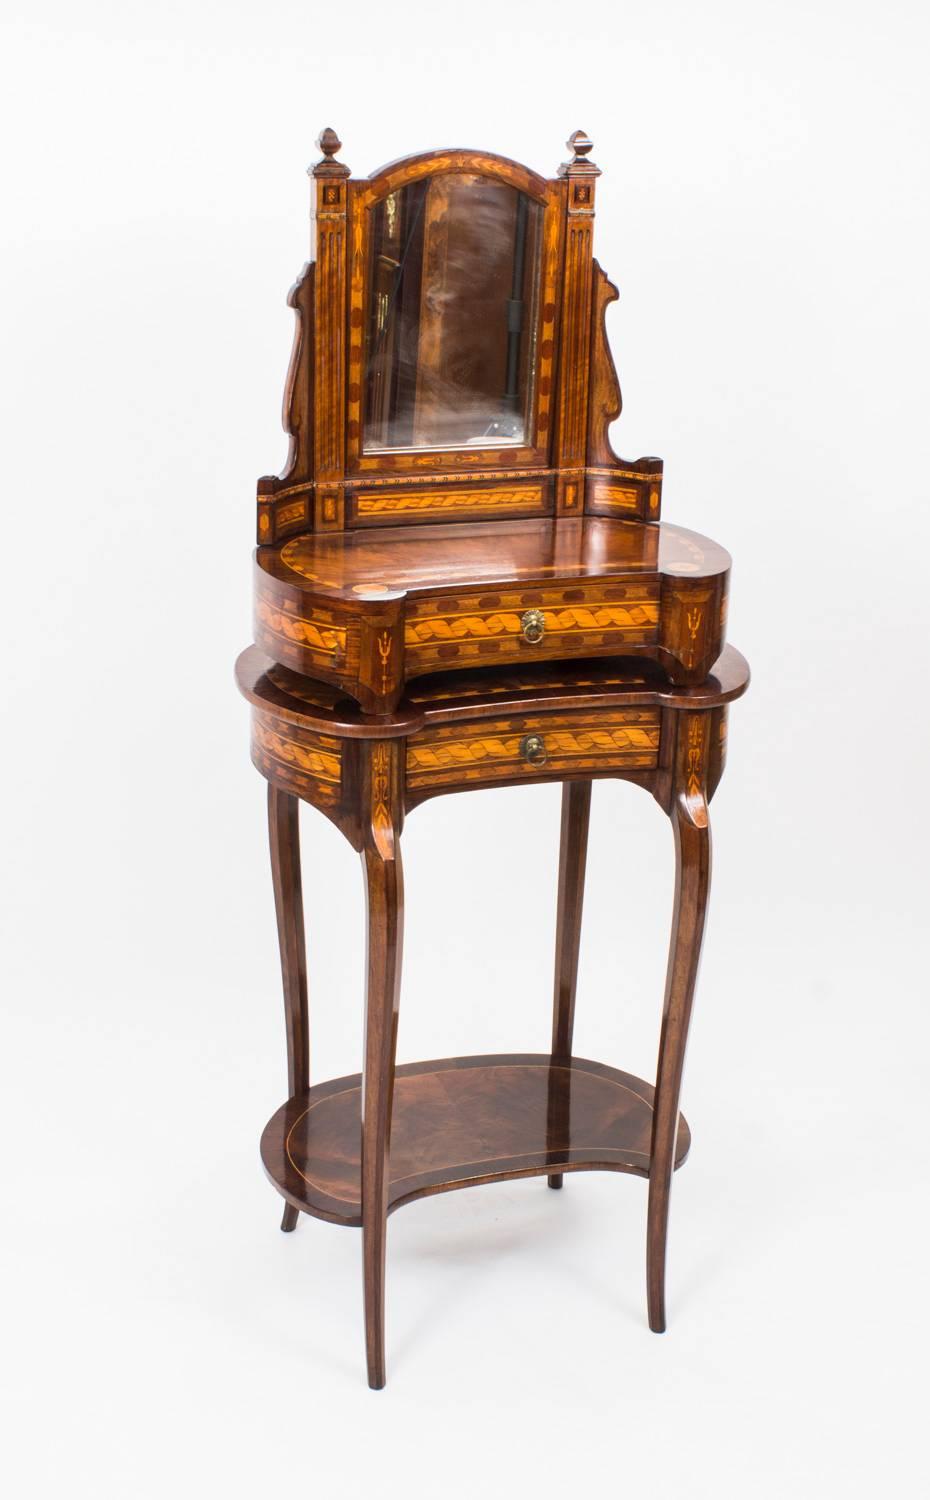 This is a beautiful antique French walnut marquetry kidney shaped occasional table and dressing table mirror set, circa 1860 in date.

Both pieces have been masterfully crafted from beautiful burr walnut with rosewood and marquetry banding, they